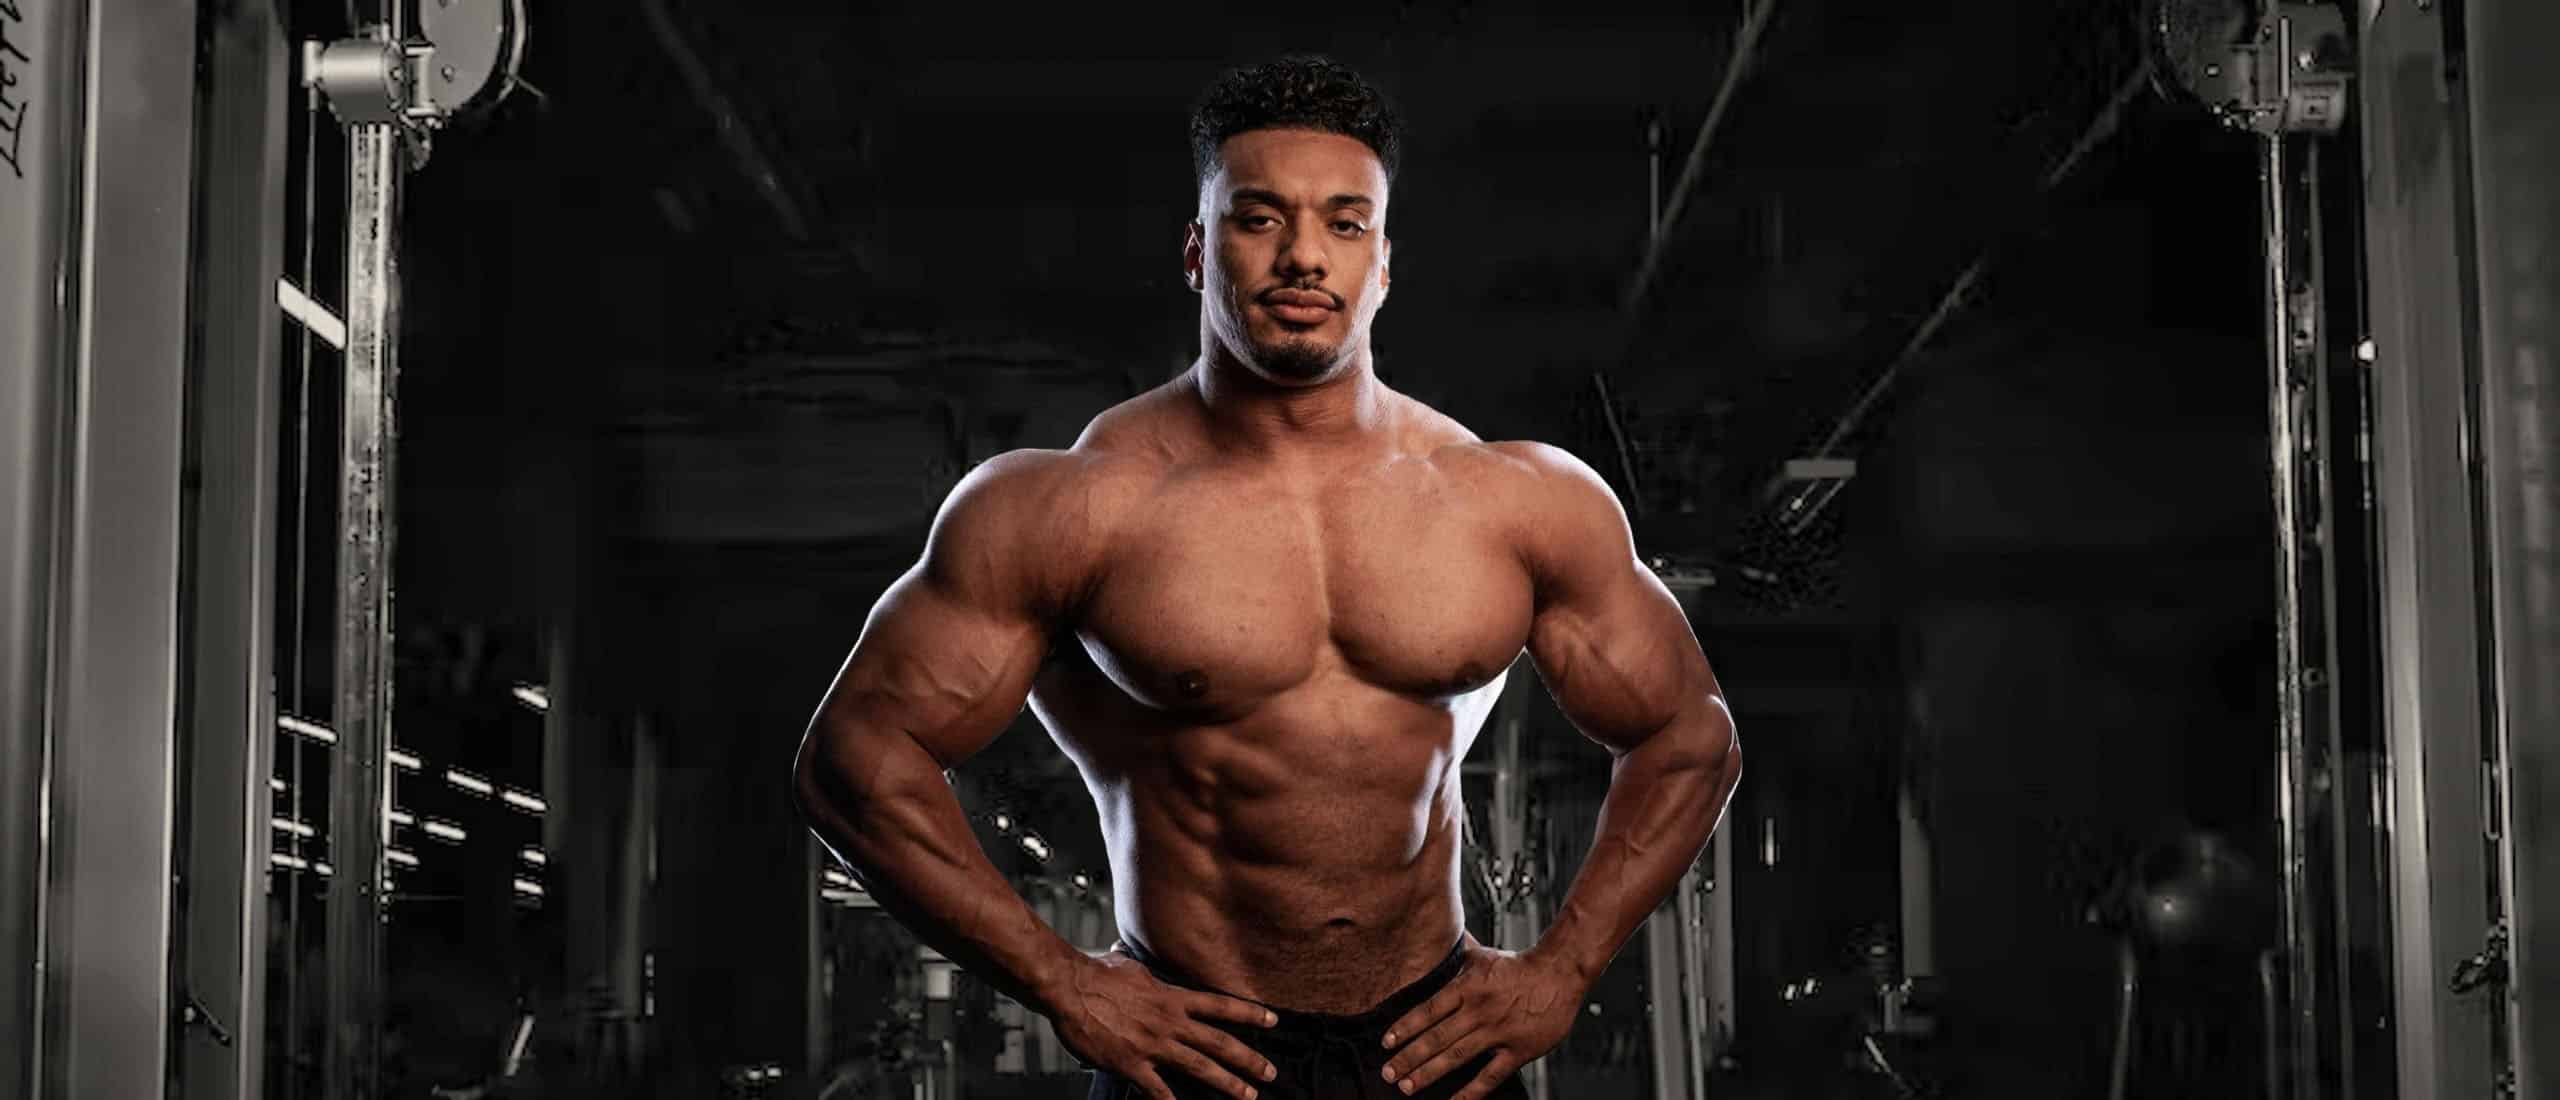 Take Home Lessons On growth hormone in bodybuilding